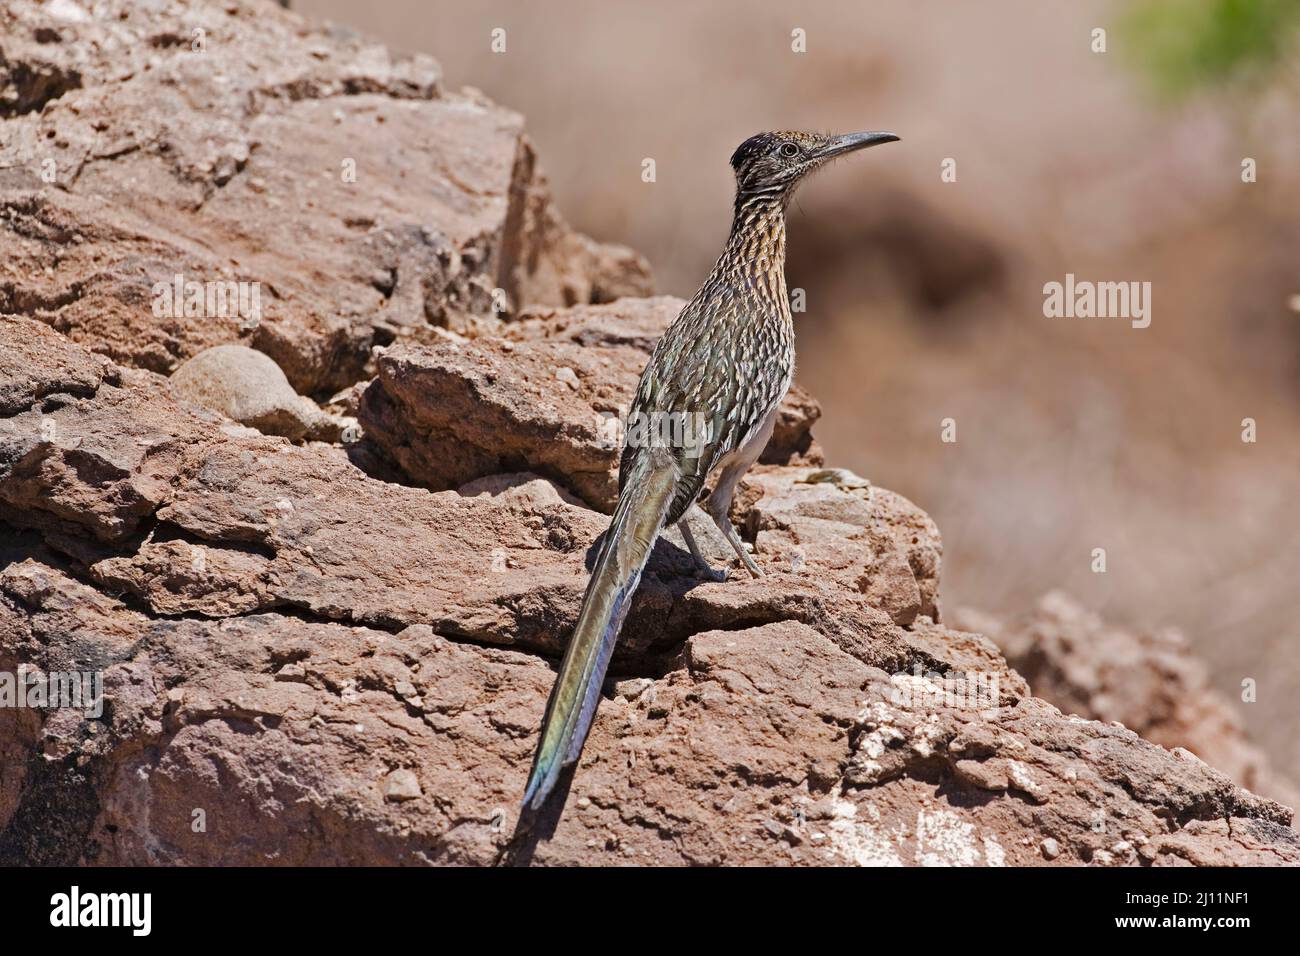 A Greater Roadrunner, Geococcyx californianus, perched on rocks Stock Photo